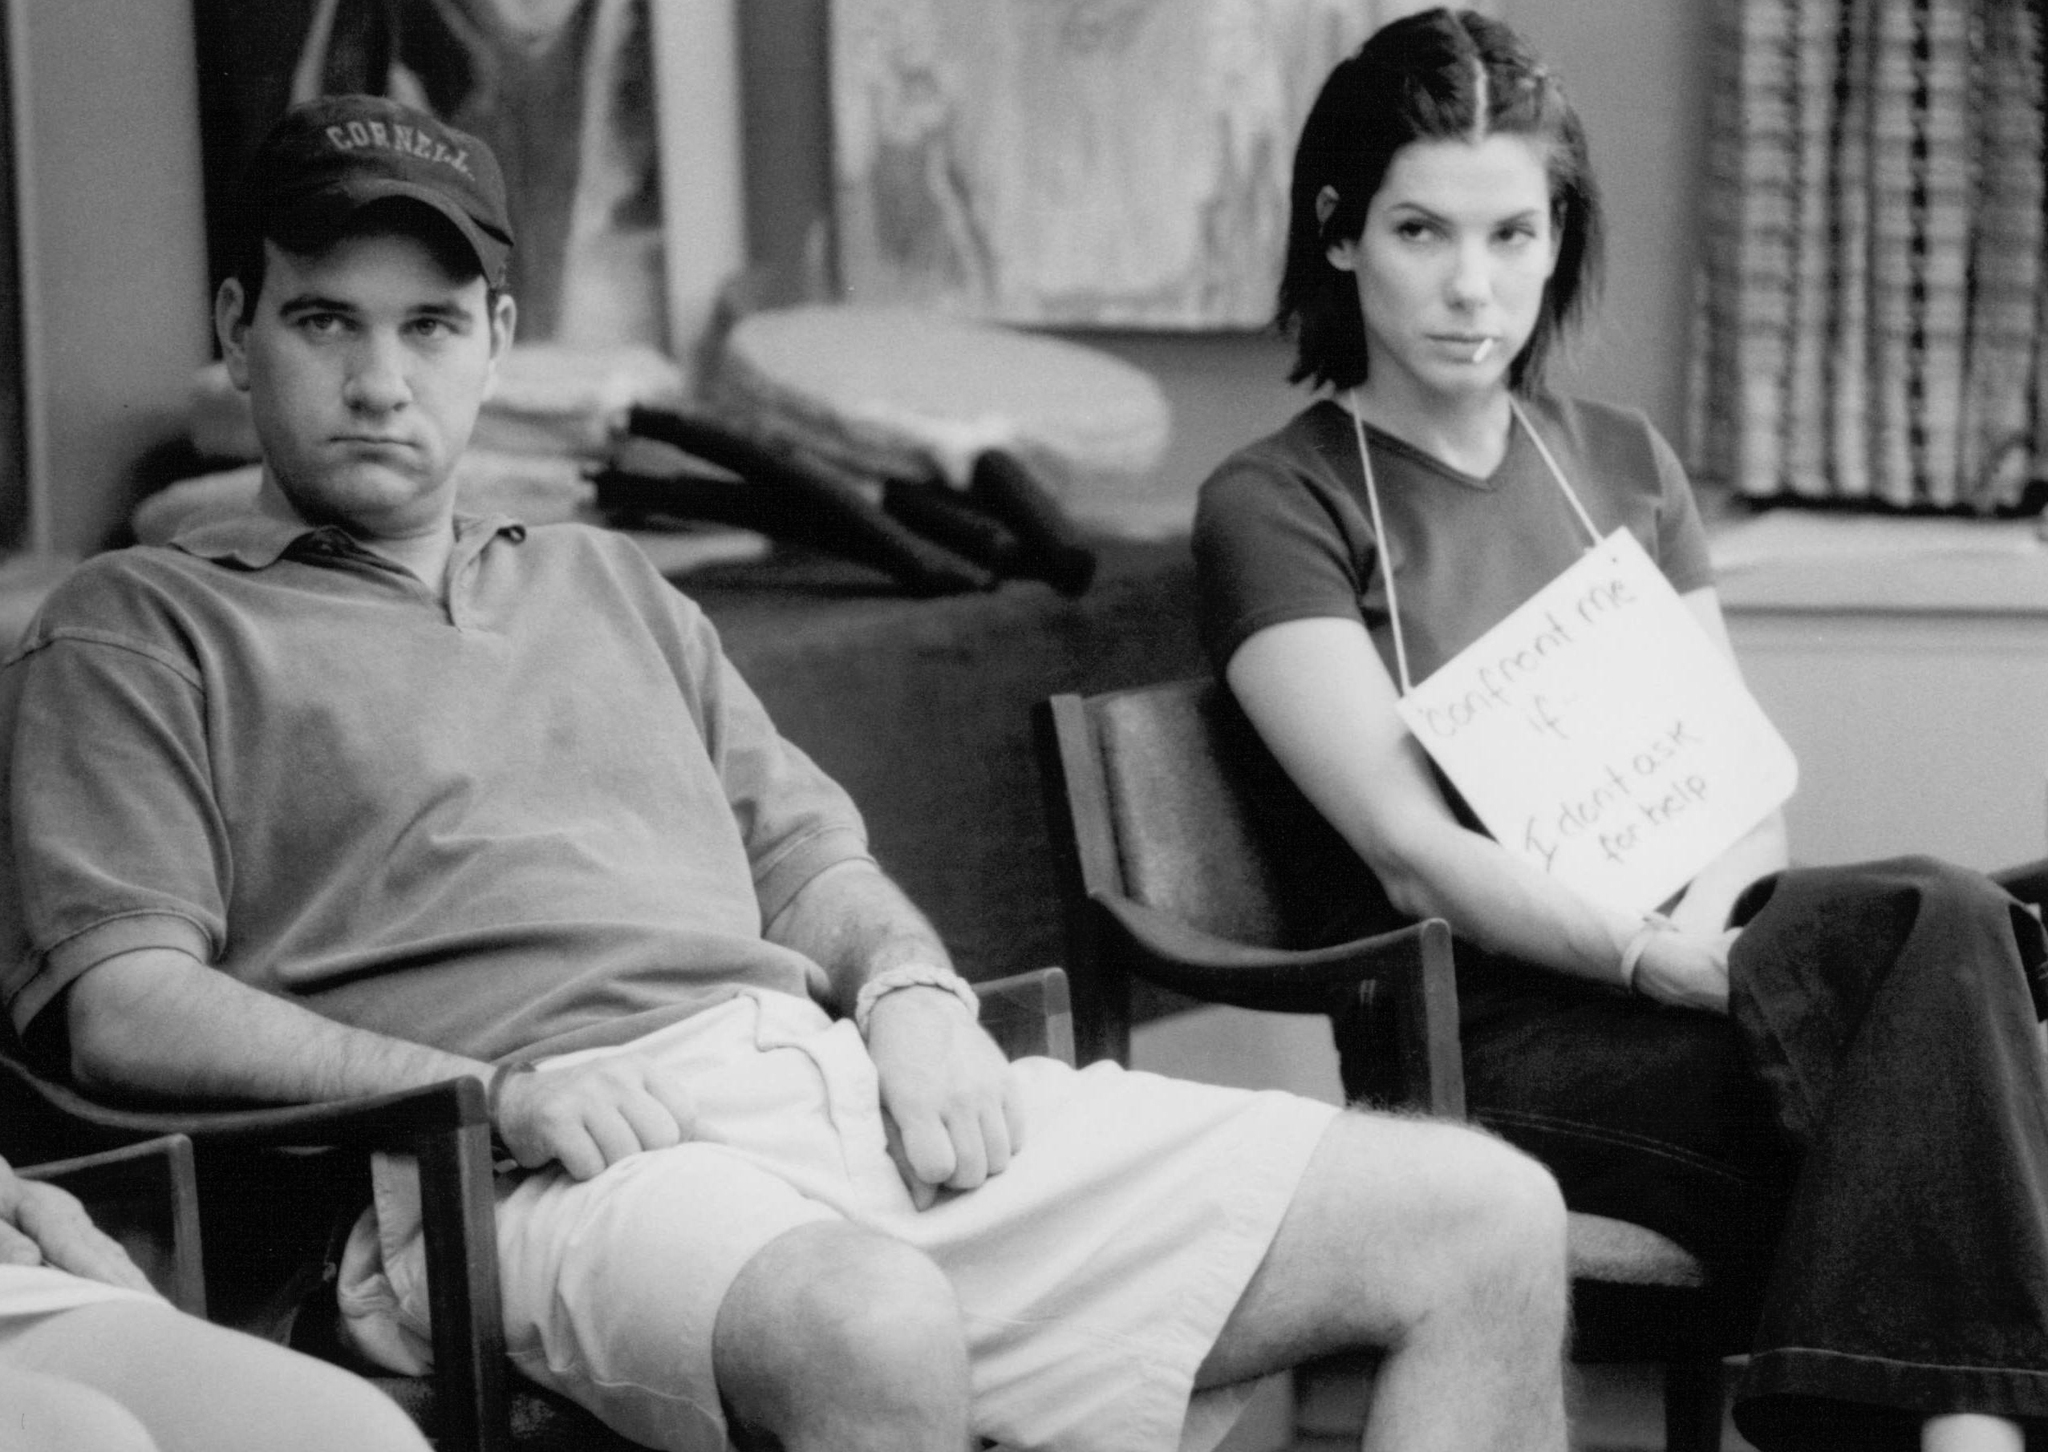 Still of Sandra Bullock and Mike O'Malley in 28 Days (2000)